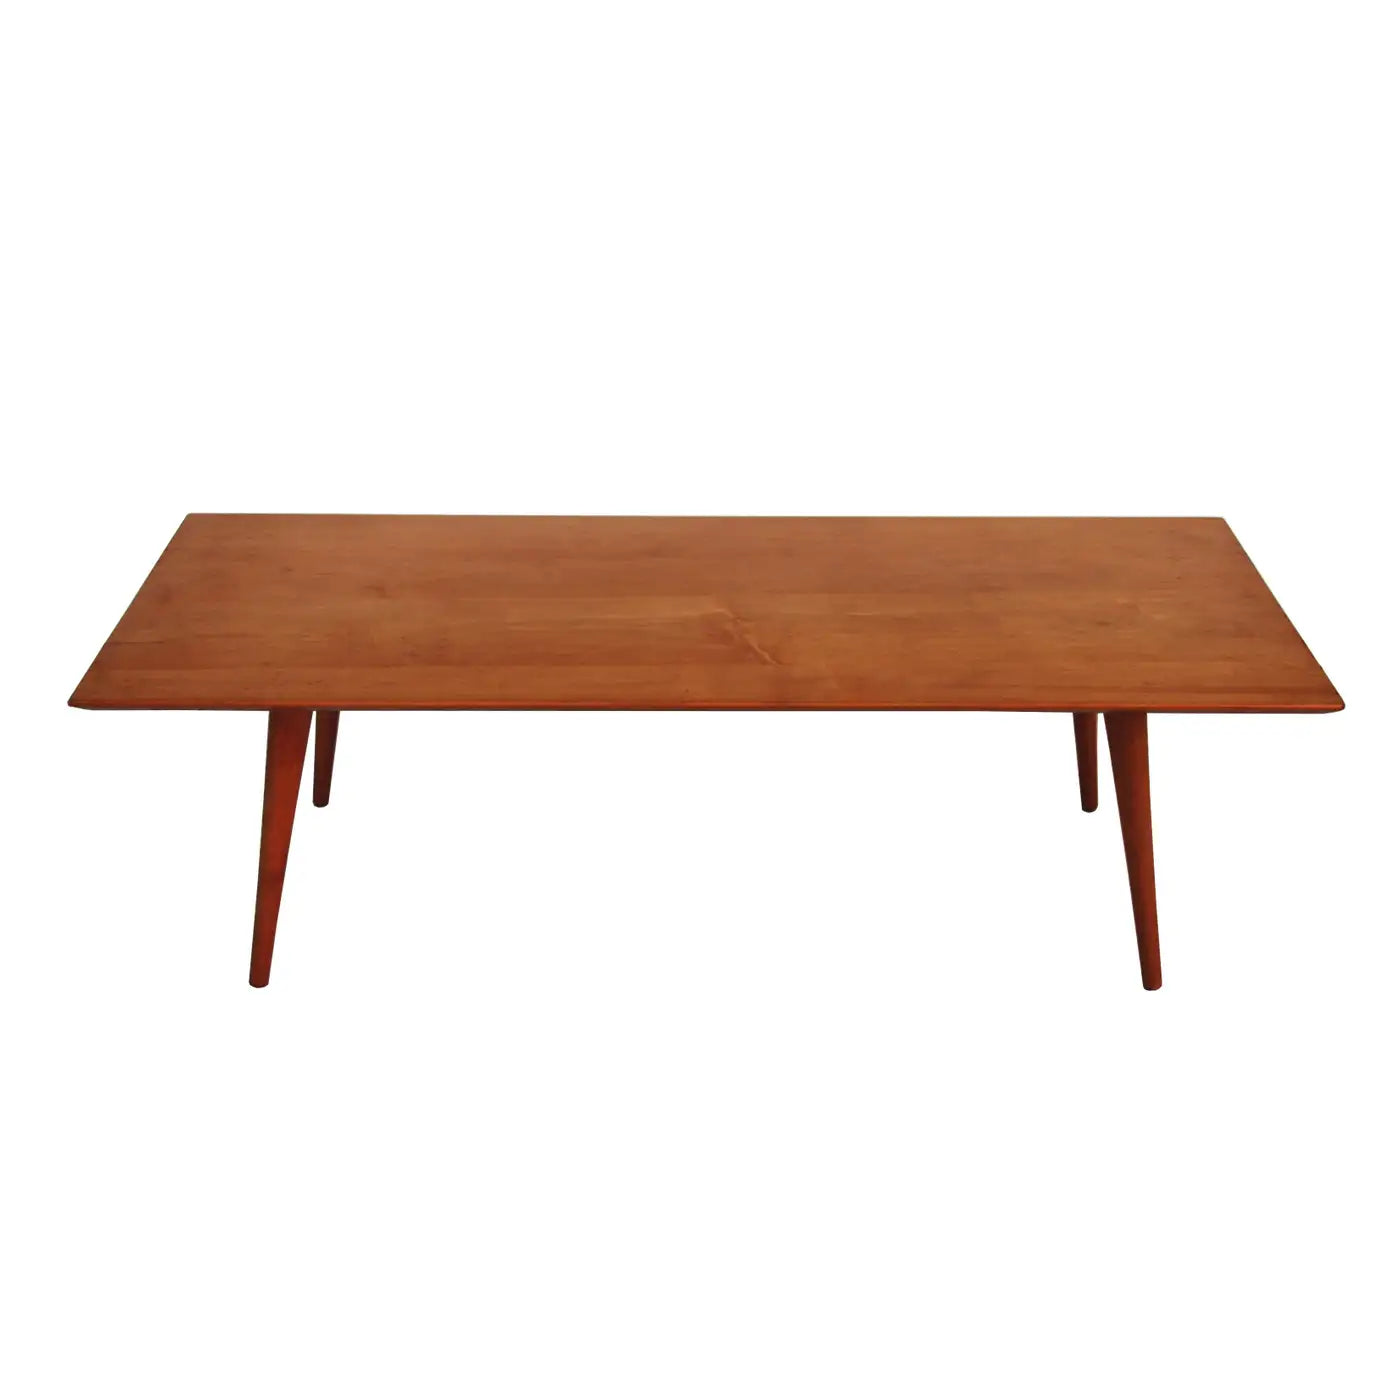 Paul McCobb Planner Group Coffee Table/ Bench